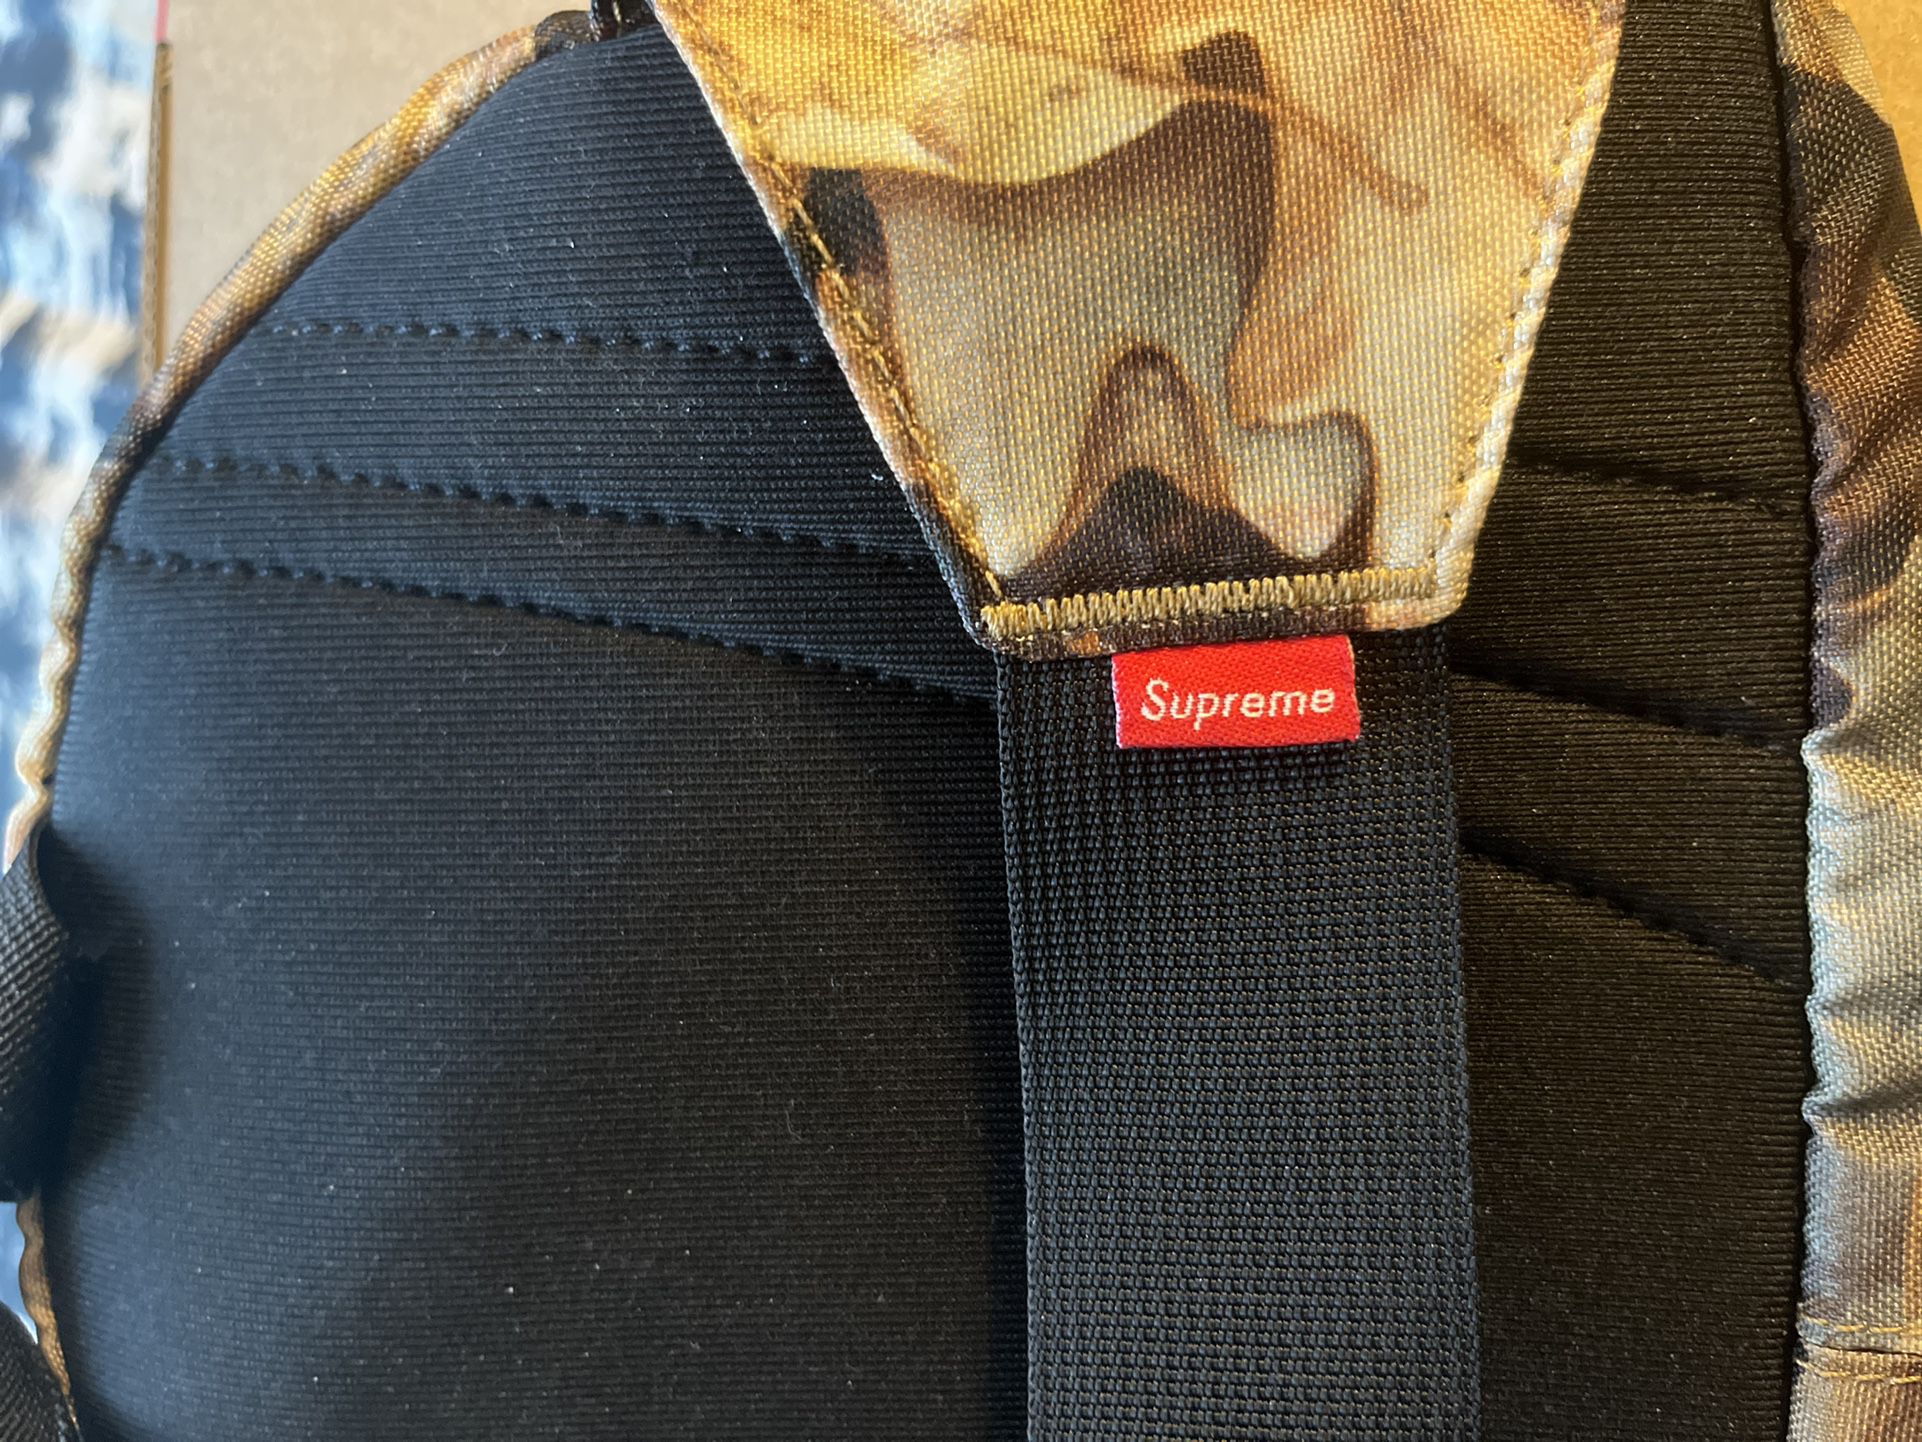 Supreme x Northface Fanny pack FW16’